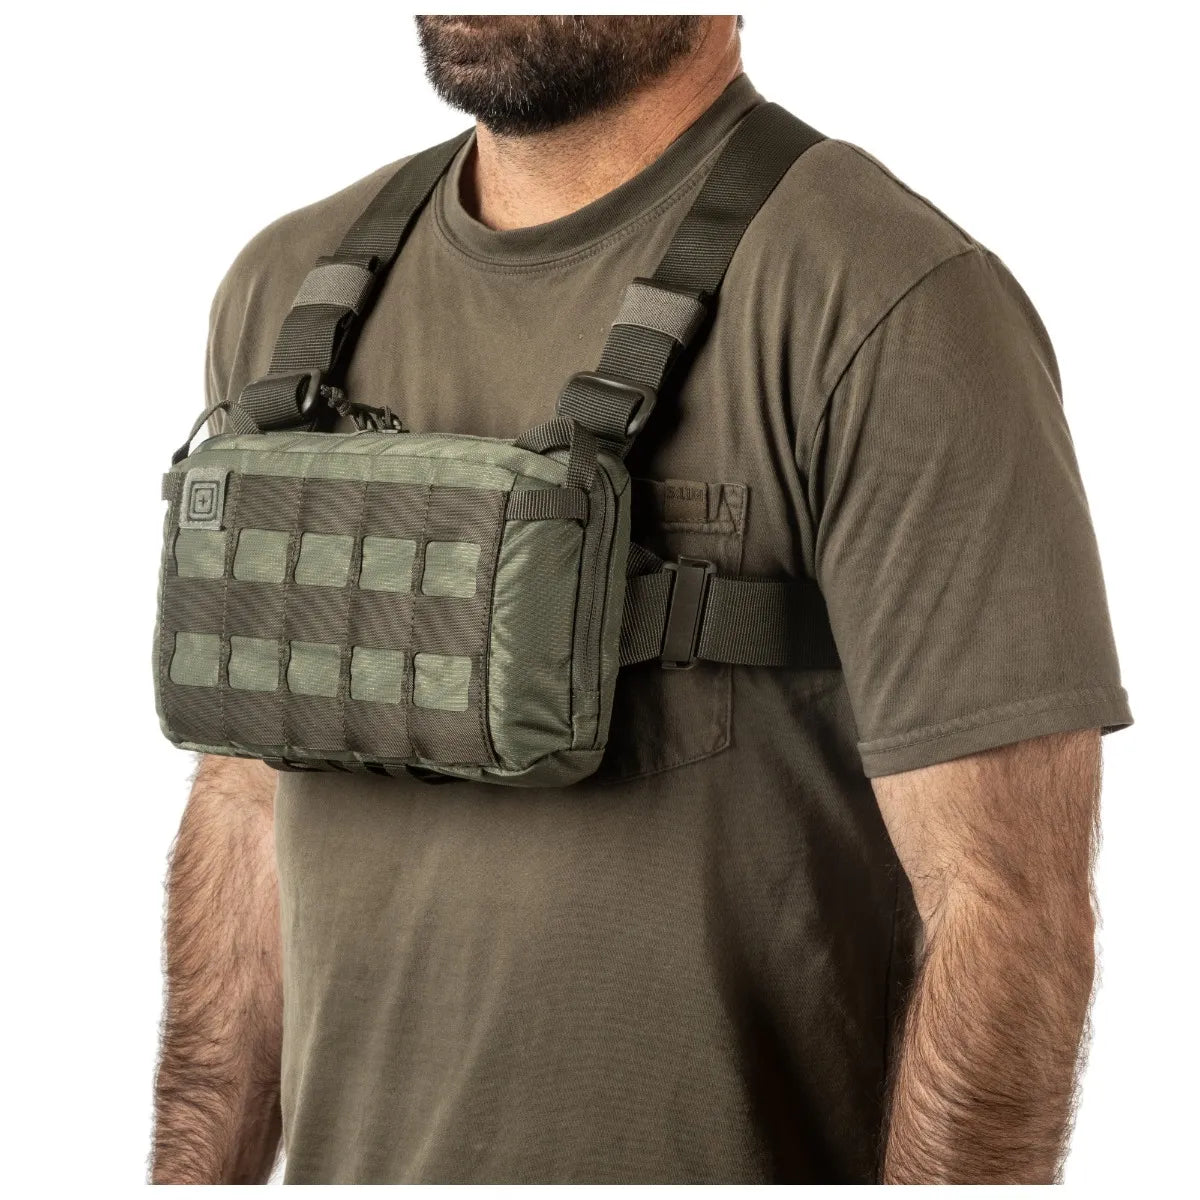 5.11 Tactical - Skyweight Survival Chest Pack